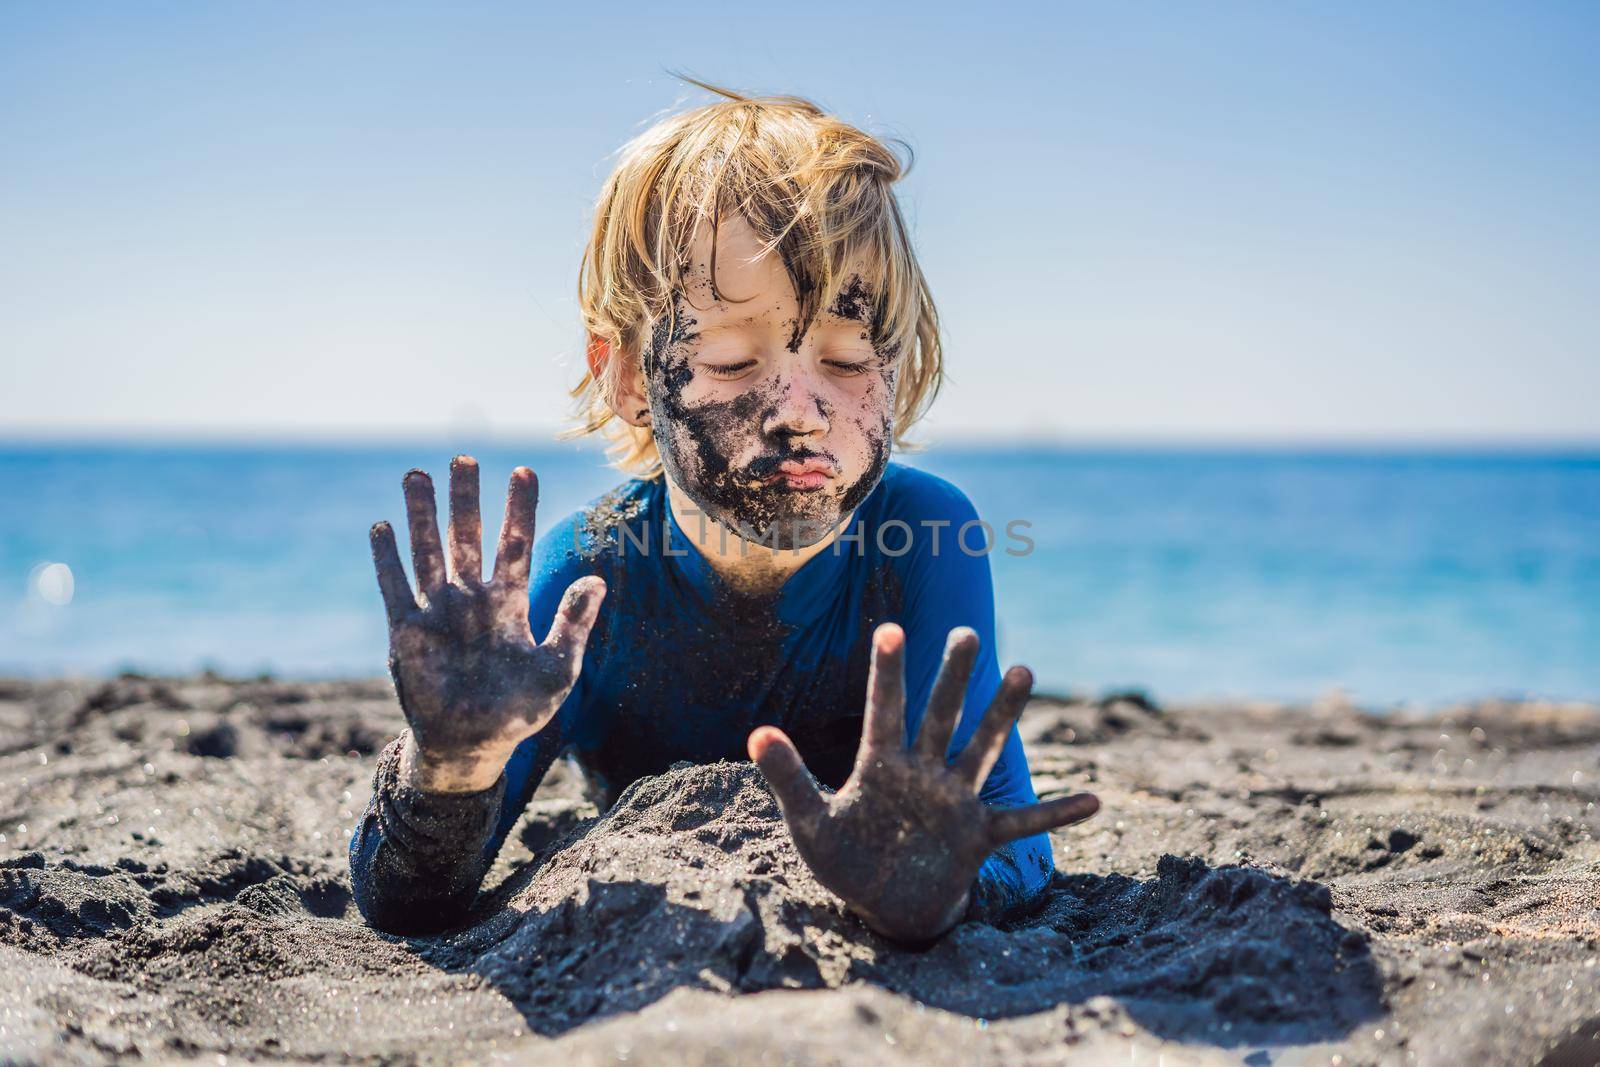 Black Friday concept. Smiling boy with dirty Black face sitting and playing on black sand sea beach before swimming in ocean. Family active lifestyle, and water leisure on summer vacation with kids. Black Friday, sales of tours and airline tickets or goods by galitskaya